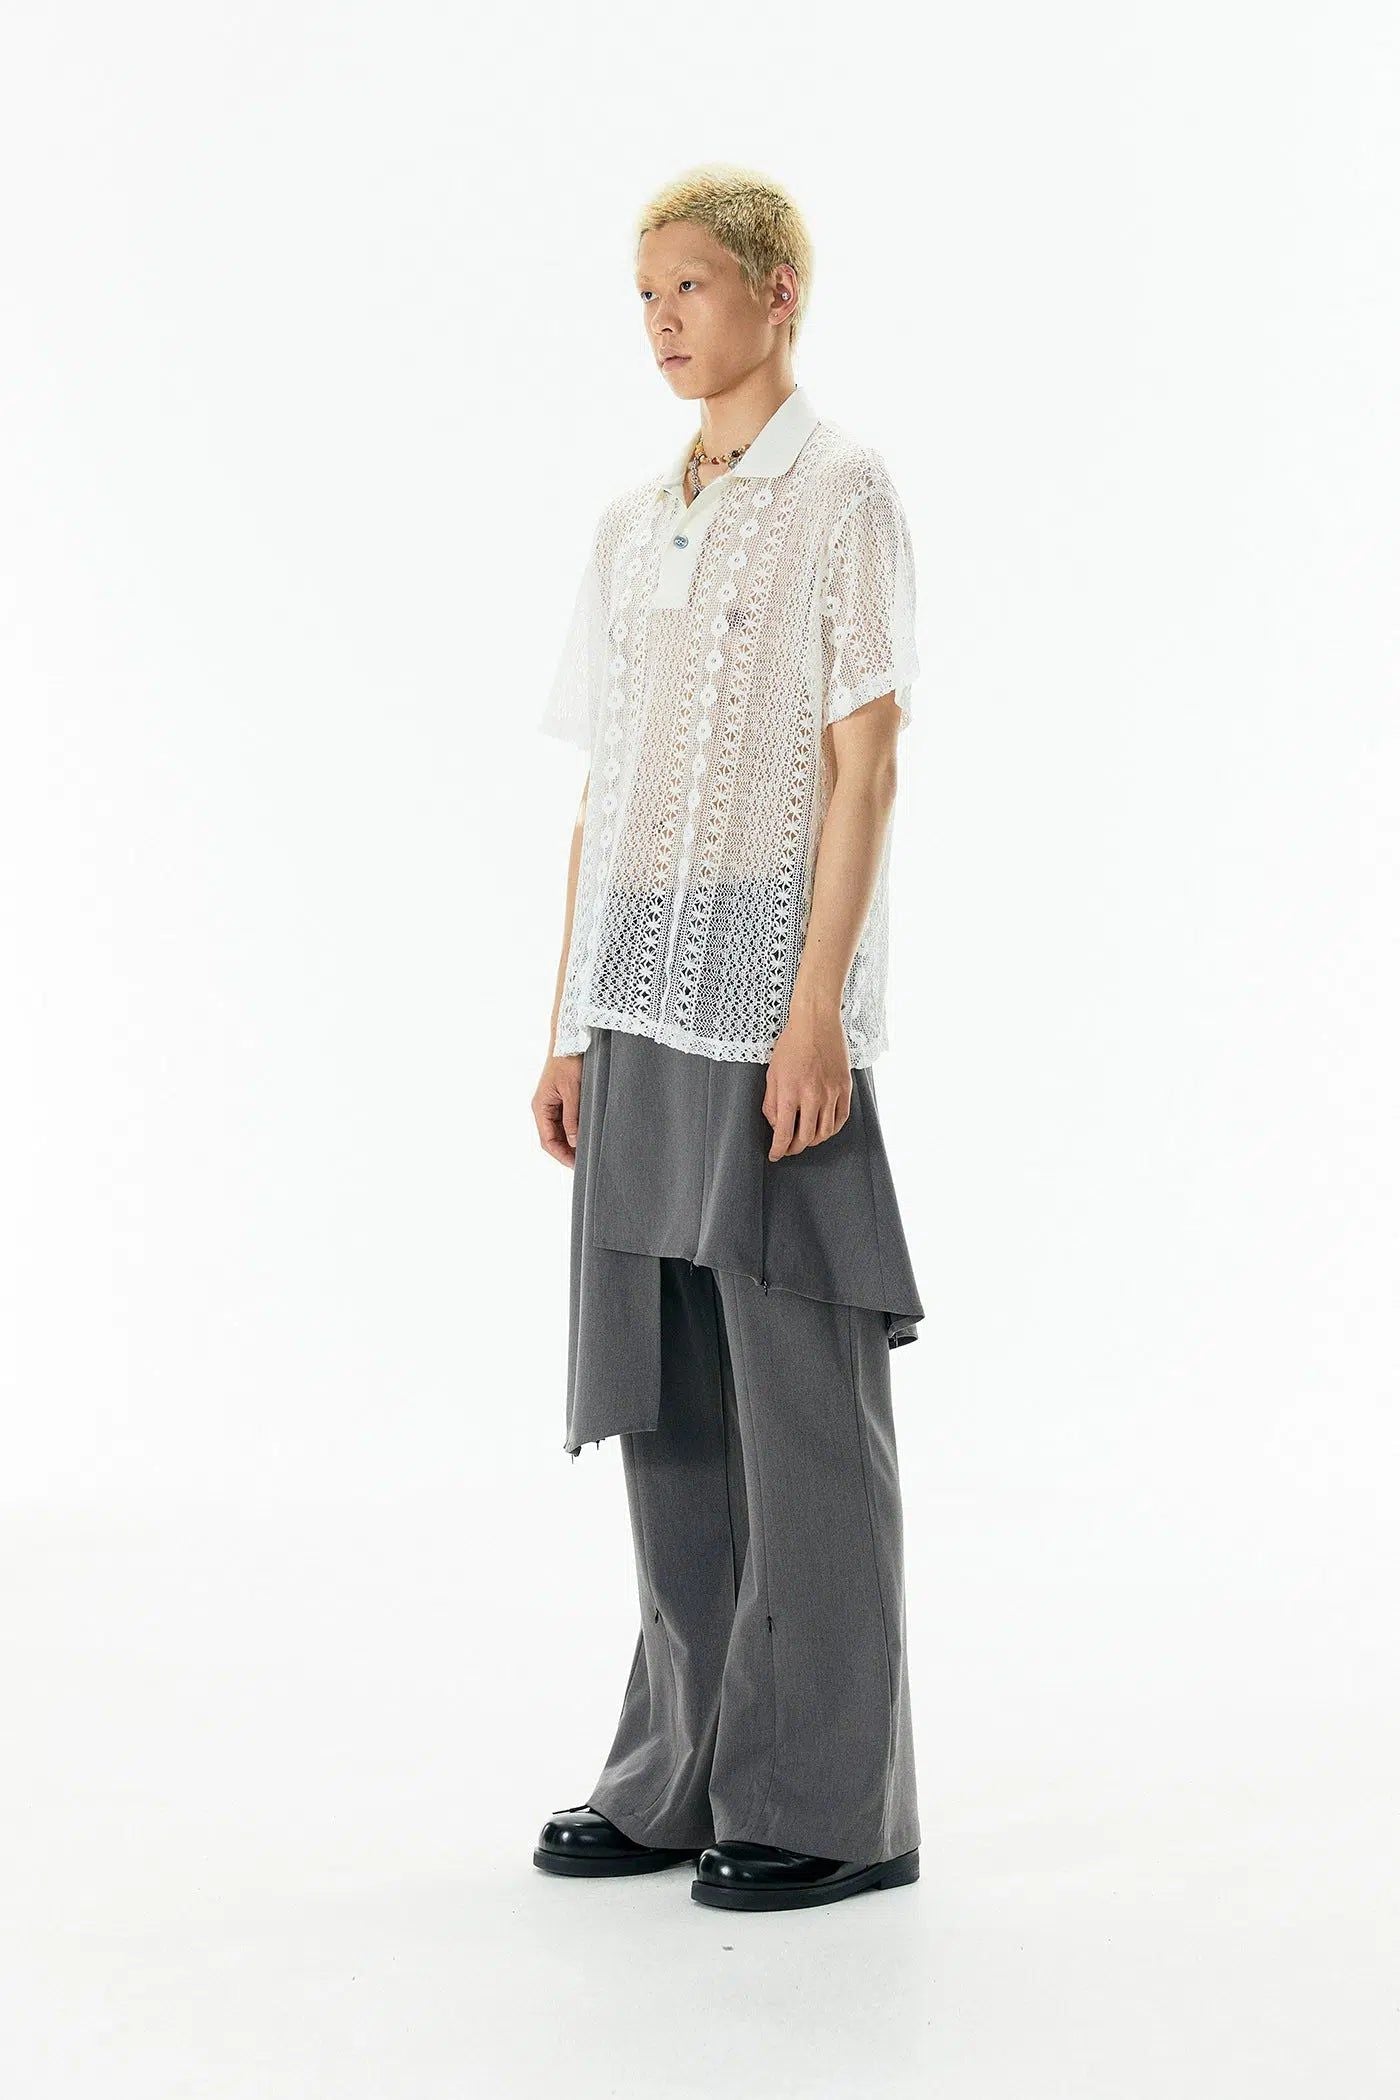 Mesh Textured Patterned Shirt Korean Street Fashion Shirt By Apriority Shop Online at OH Vault